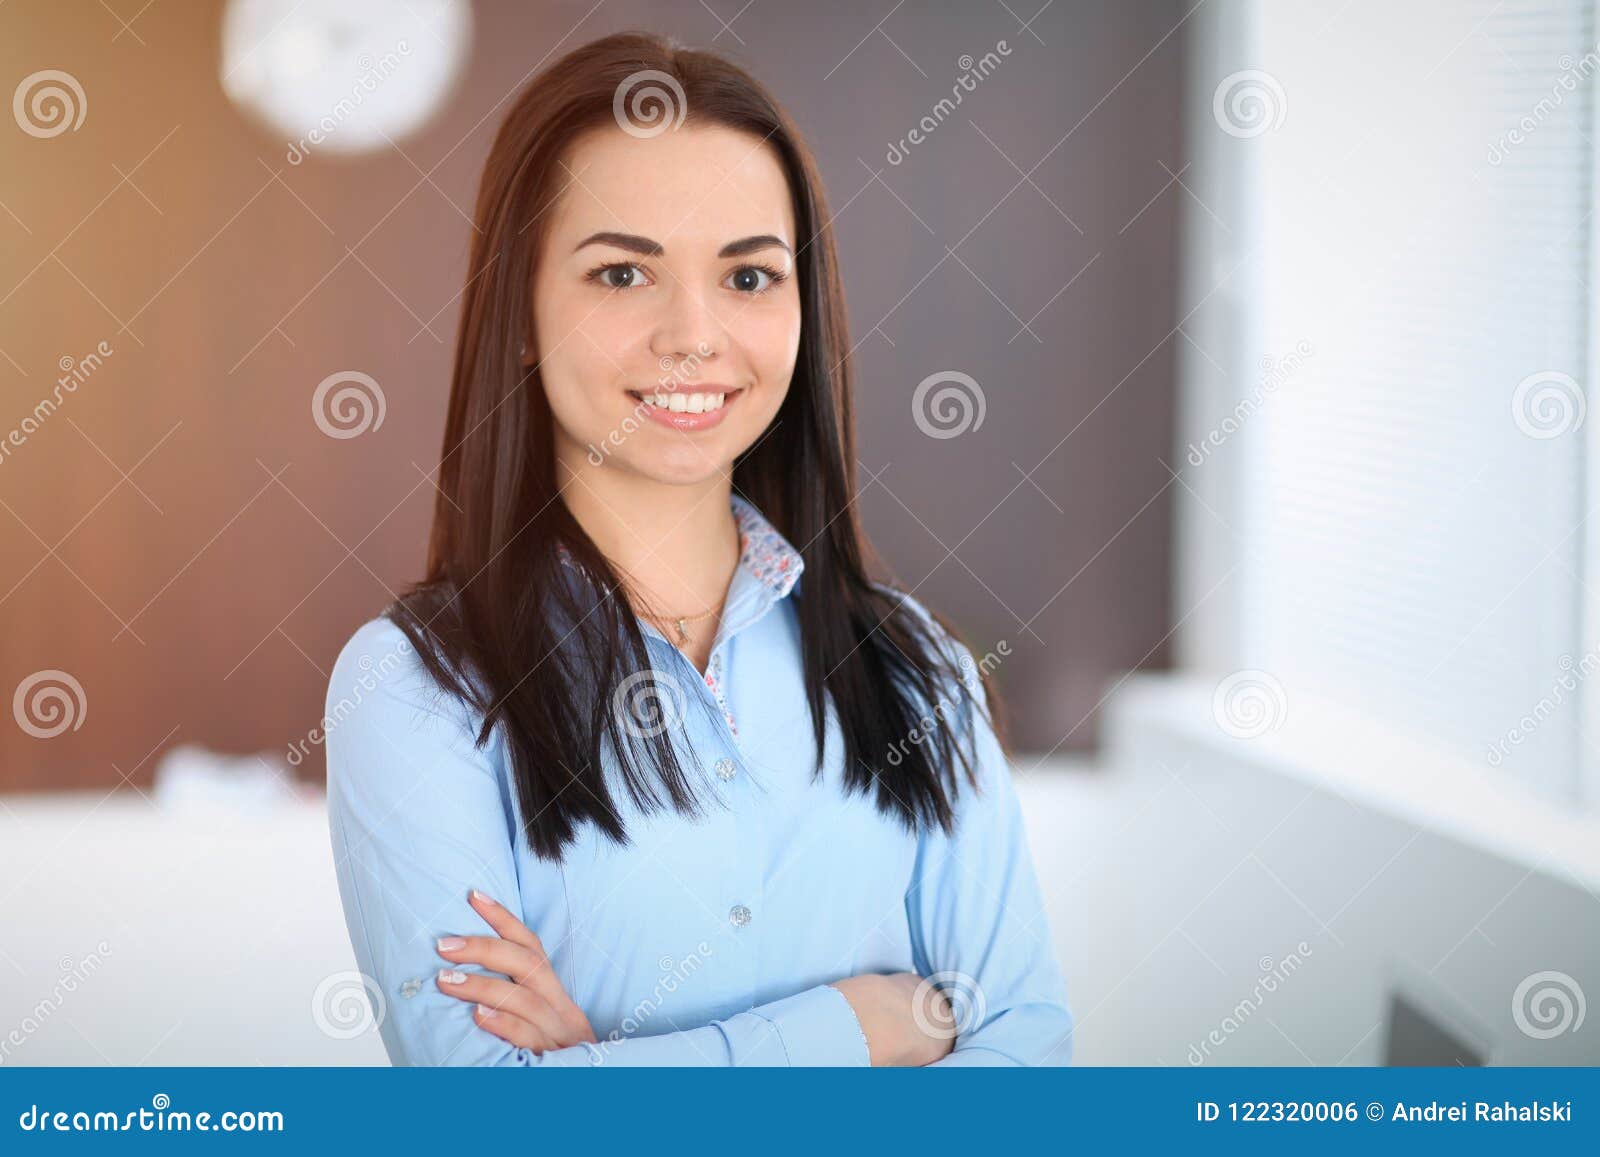 Young Brunette Business Woman Looks Like A Student Girl Working In